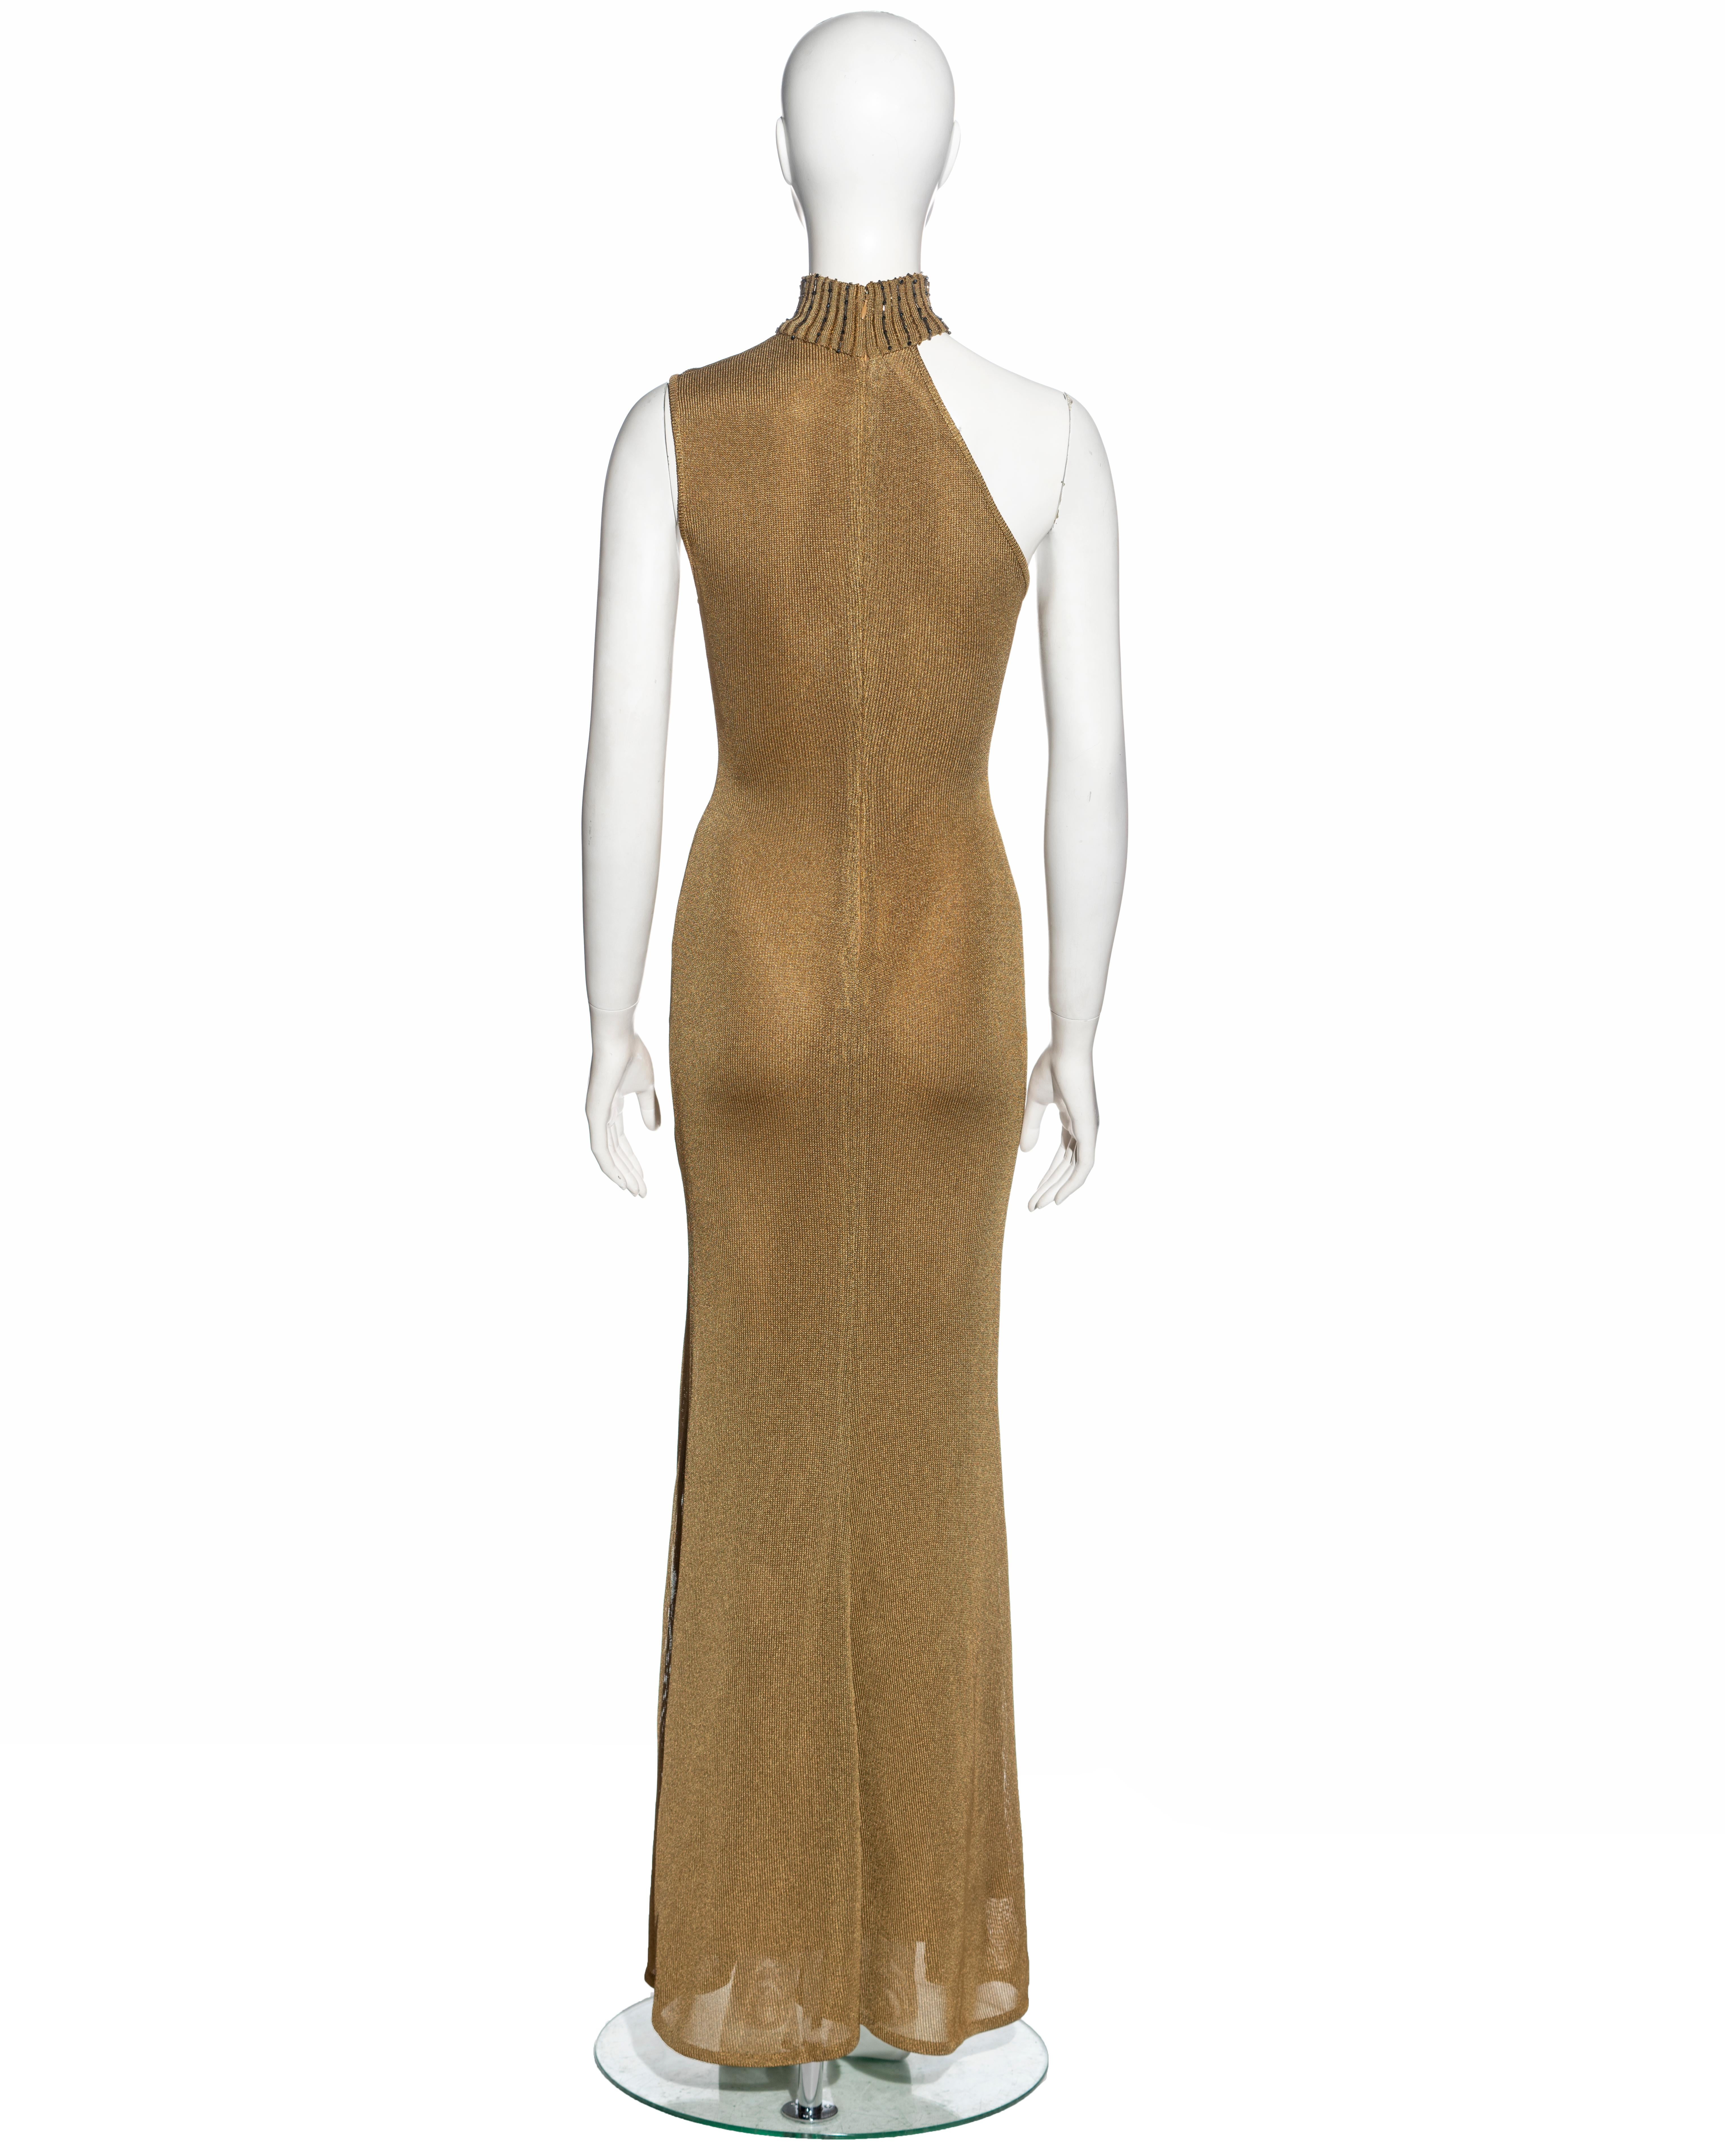 Gianni Versace gold knitted asymmetric evening dress, fw 1996 For Sale 6